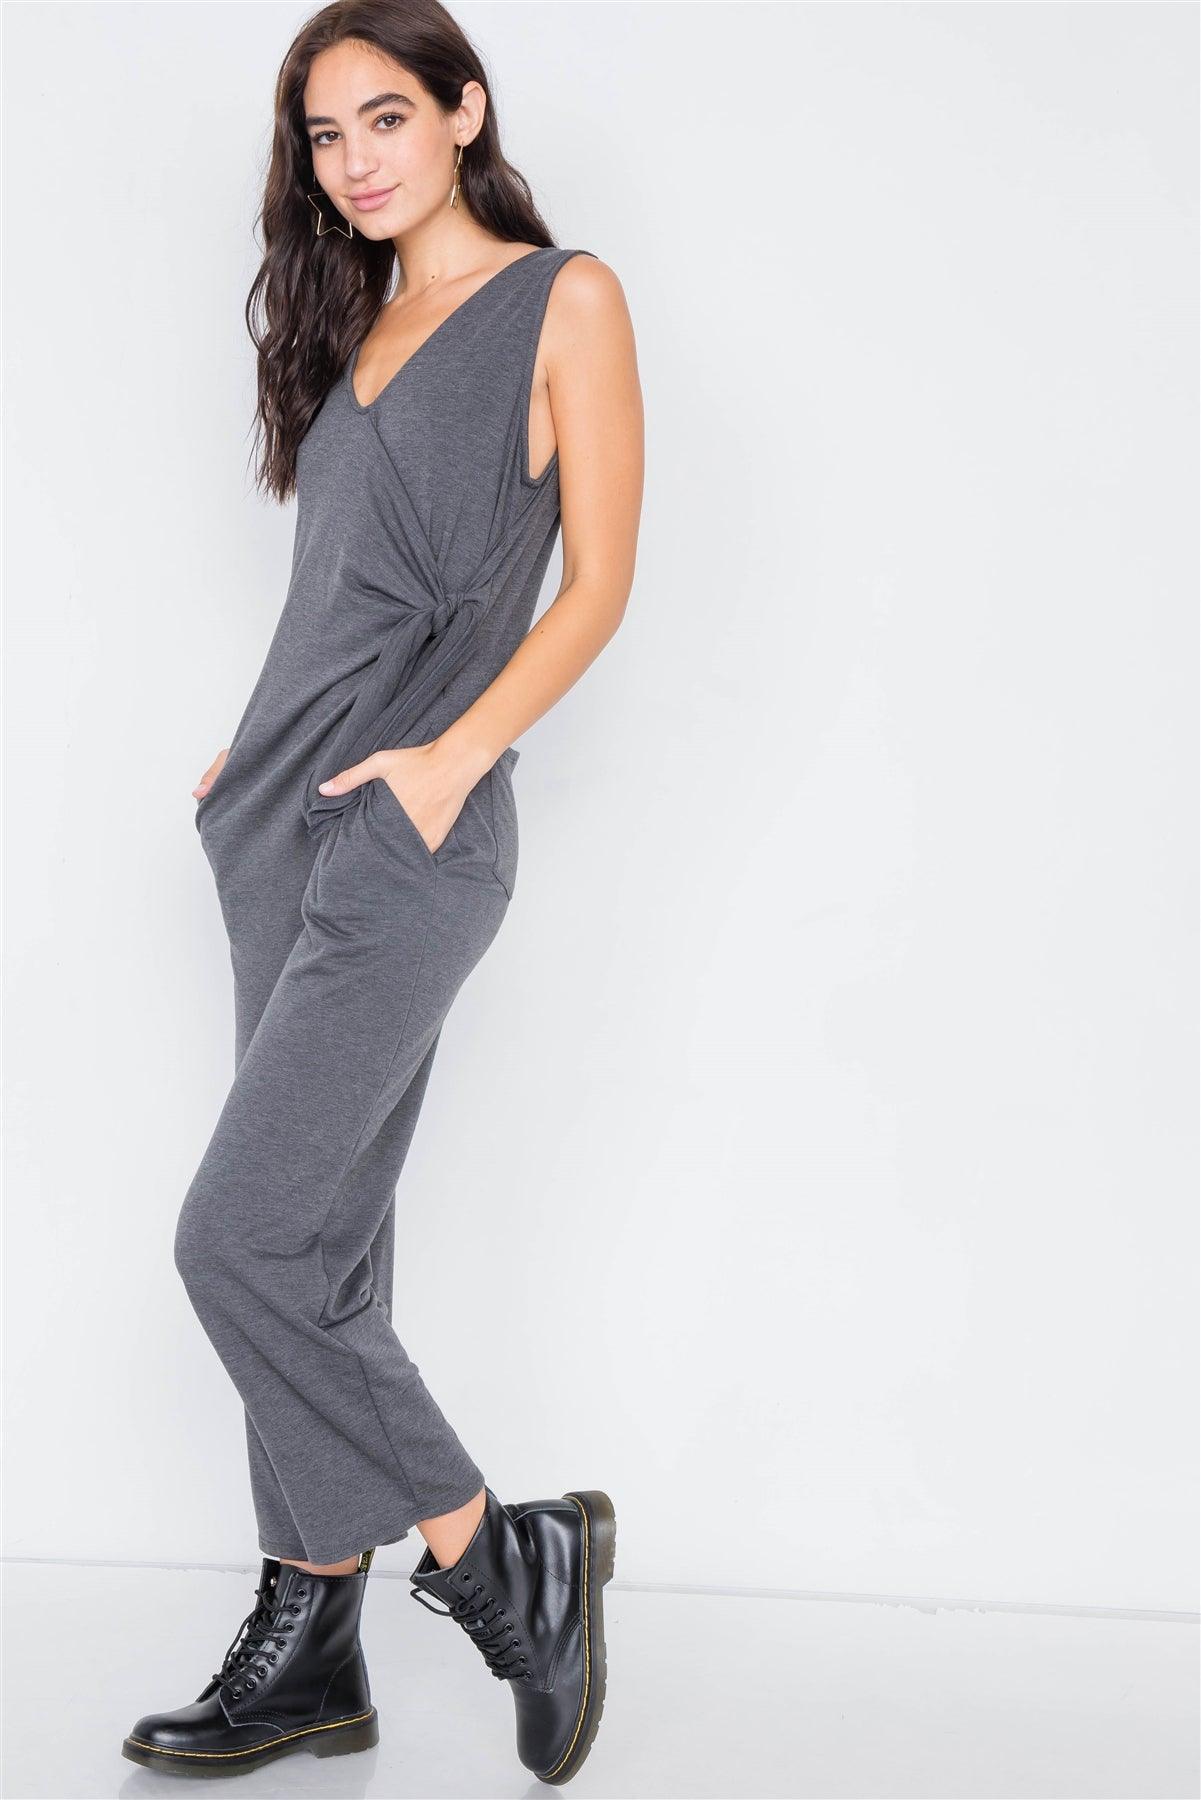 Charcoal Marled Knit Mock Wrap Ankle Length Jumpsuit /1-2-2